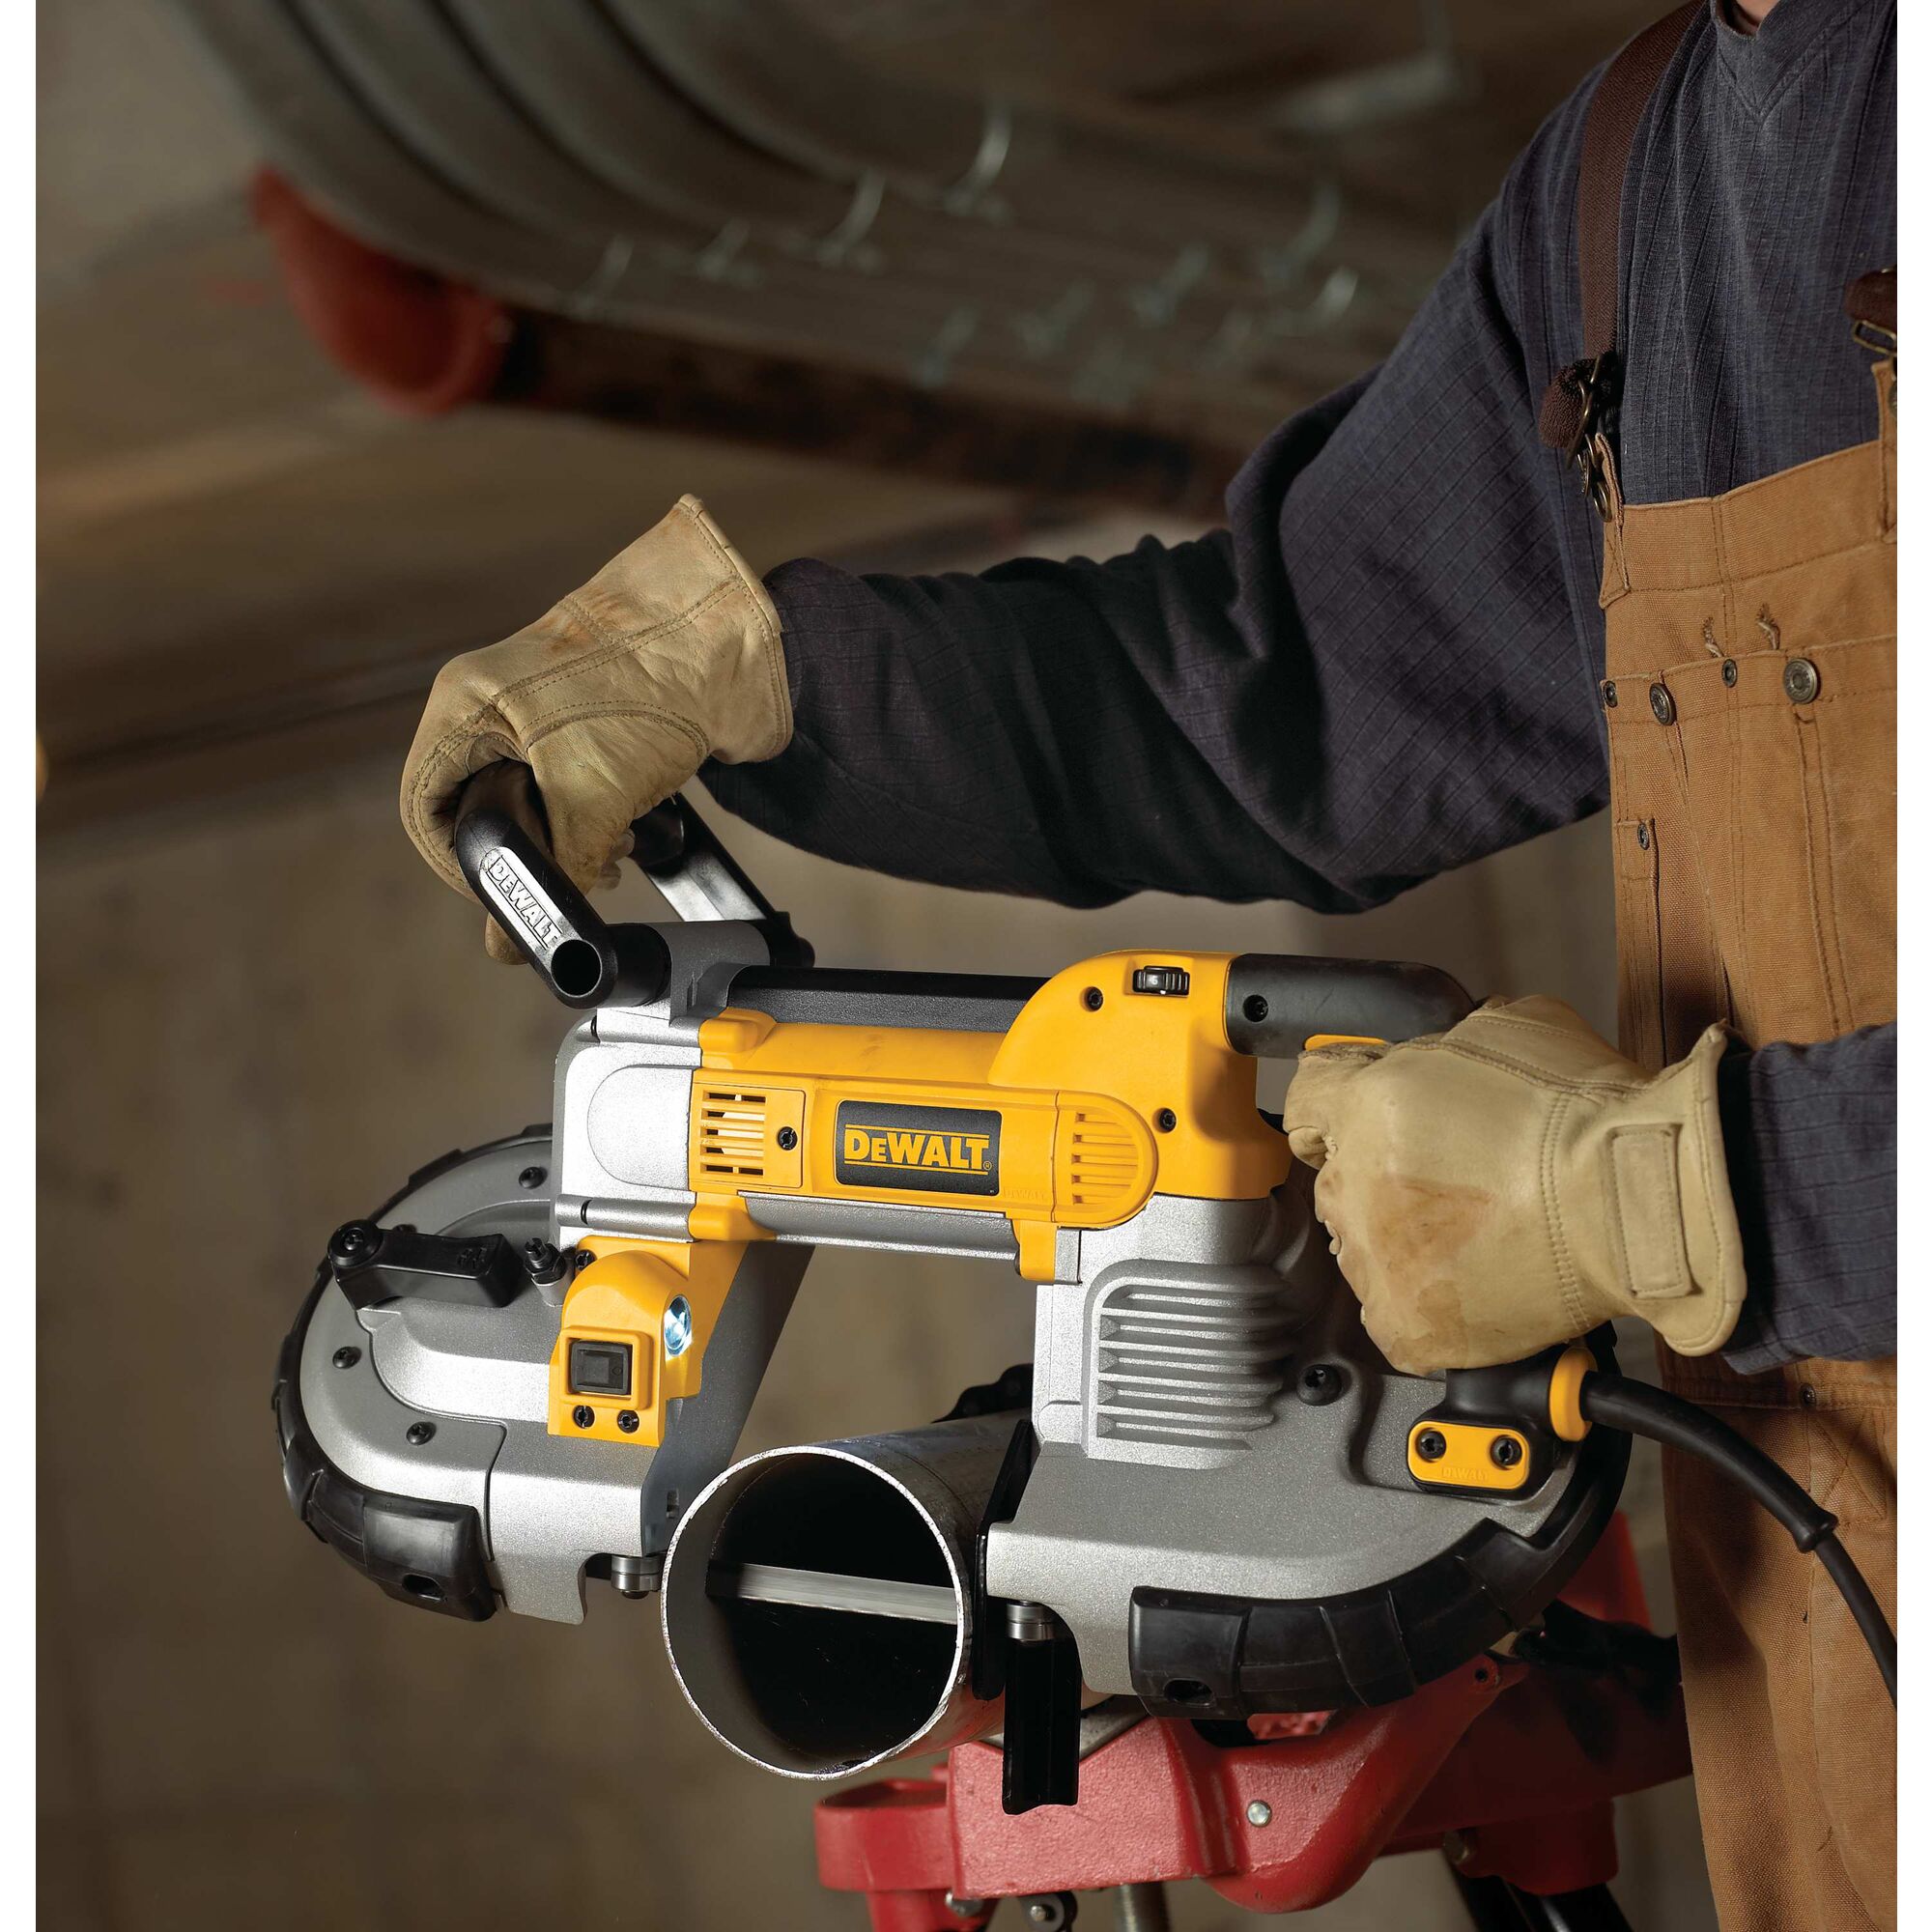 DEWALT 10 Amps 4.75-in Portable Band Saw (Bare Tool) in the